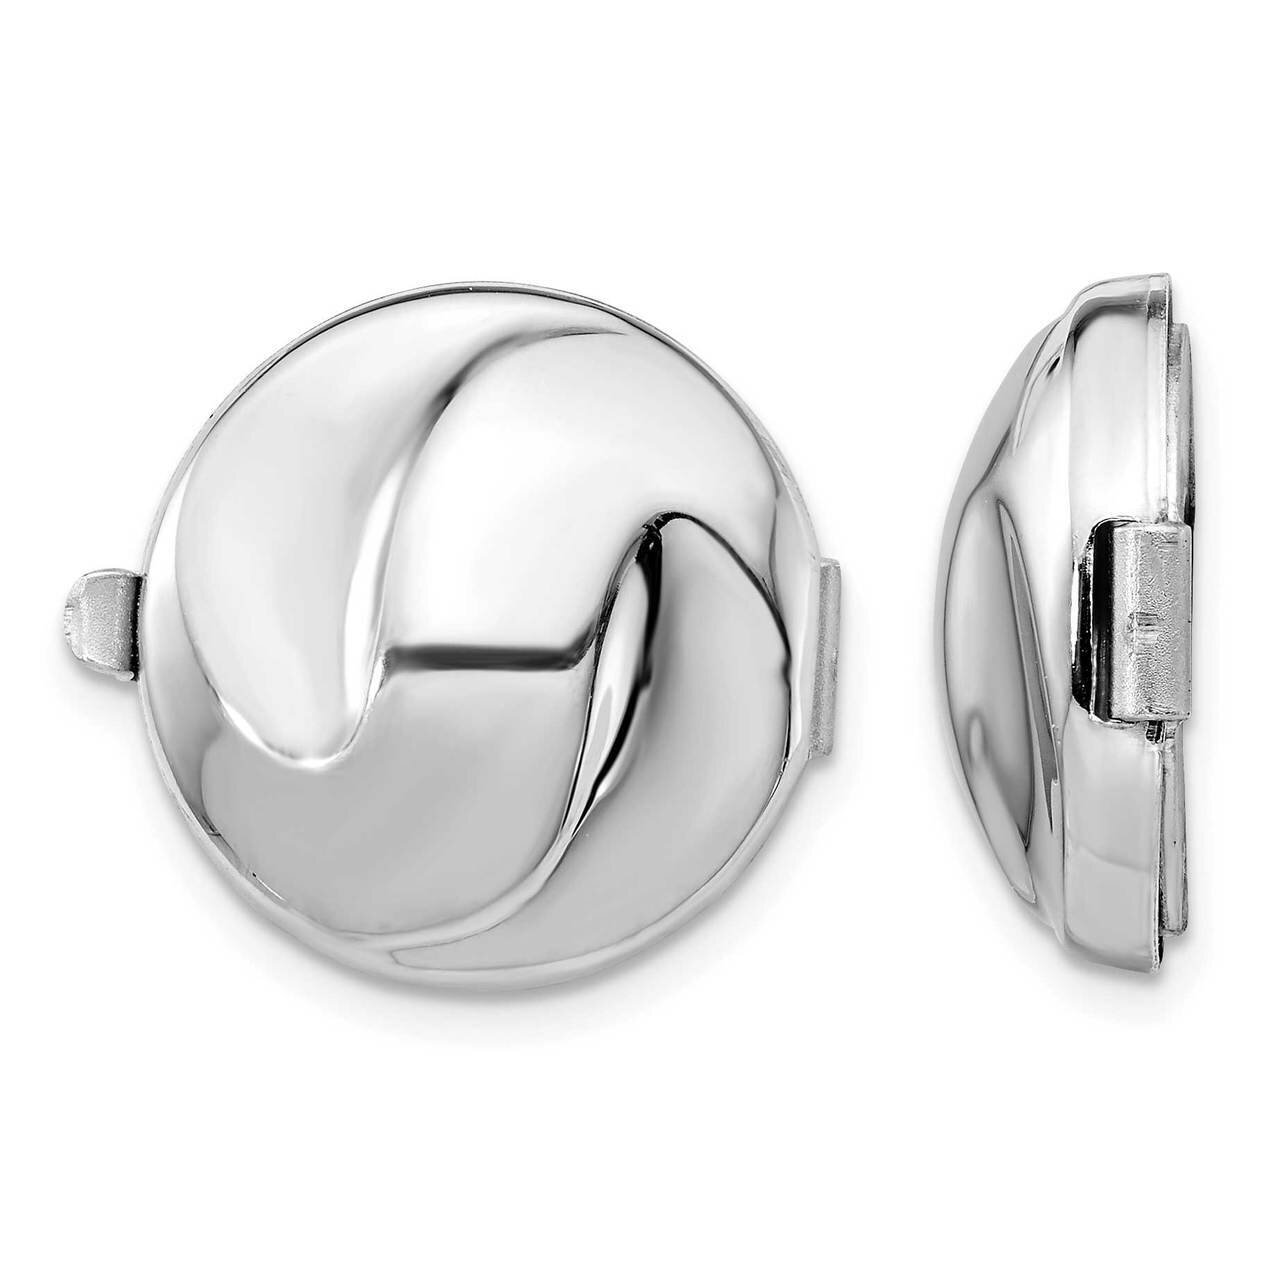 Set/2 Swirl Design Button Covers Sterling Silver Rhodium-plated QQ617